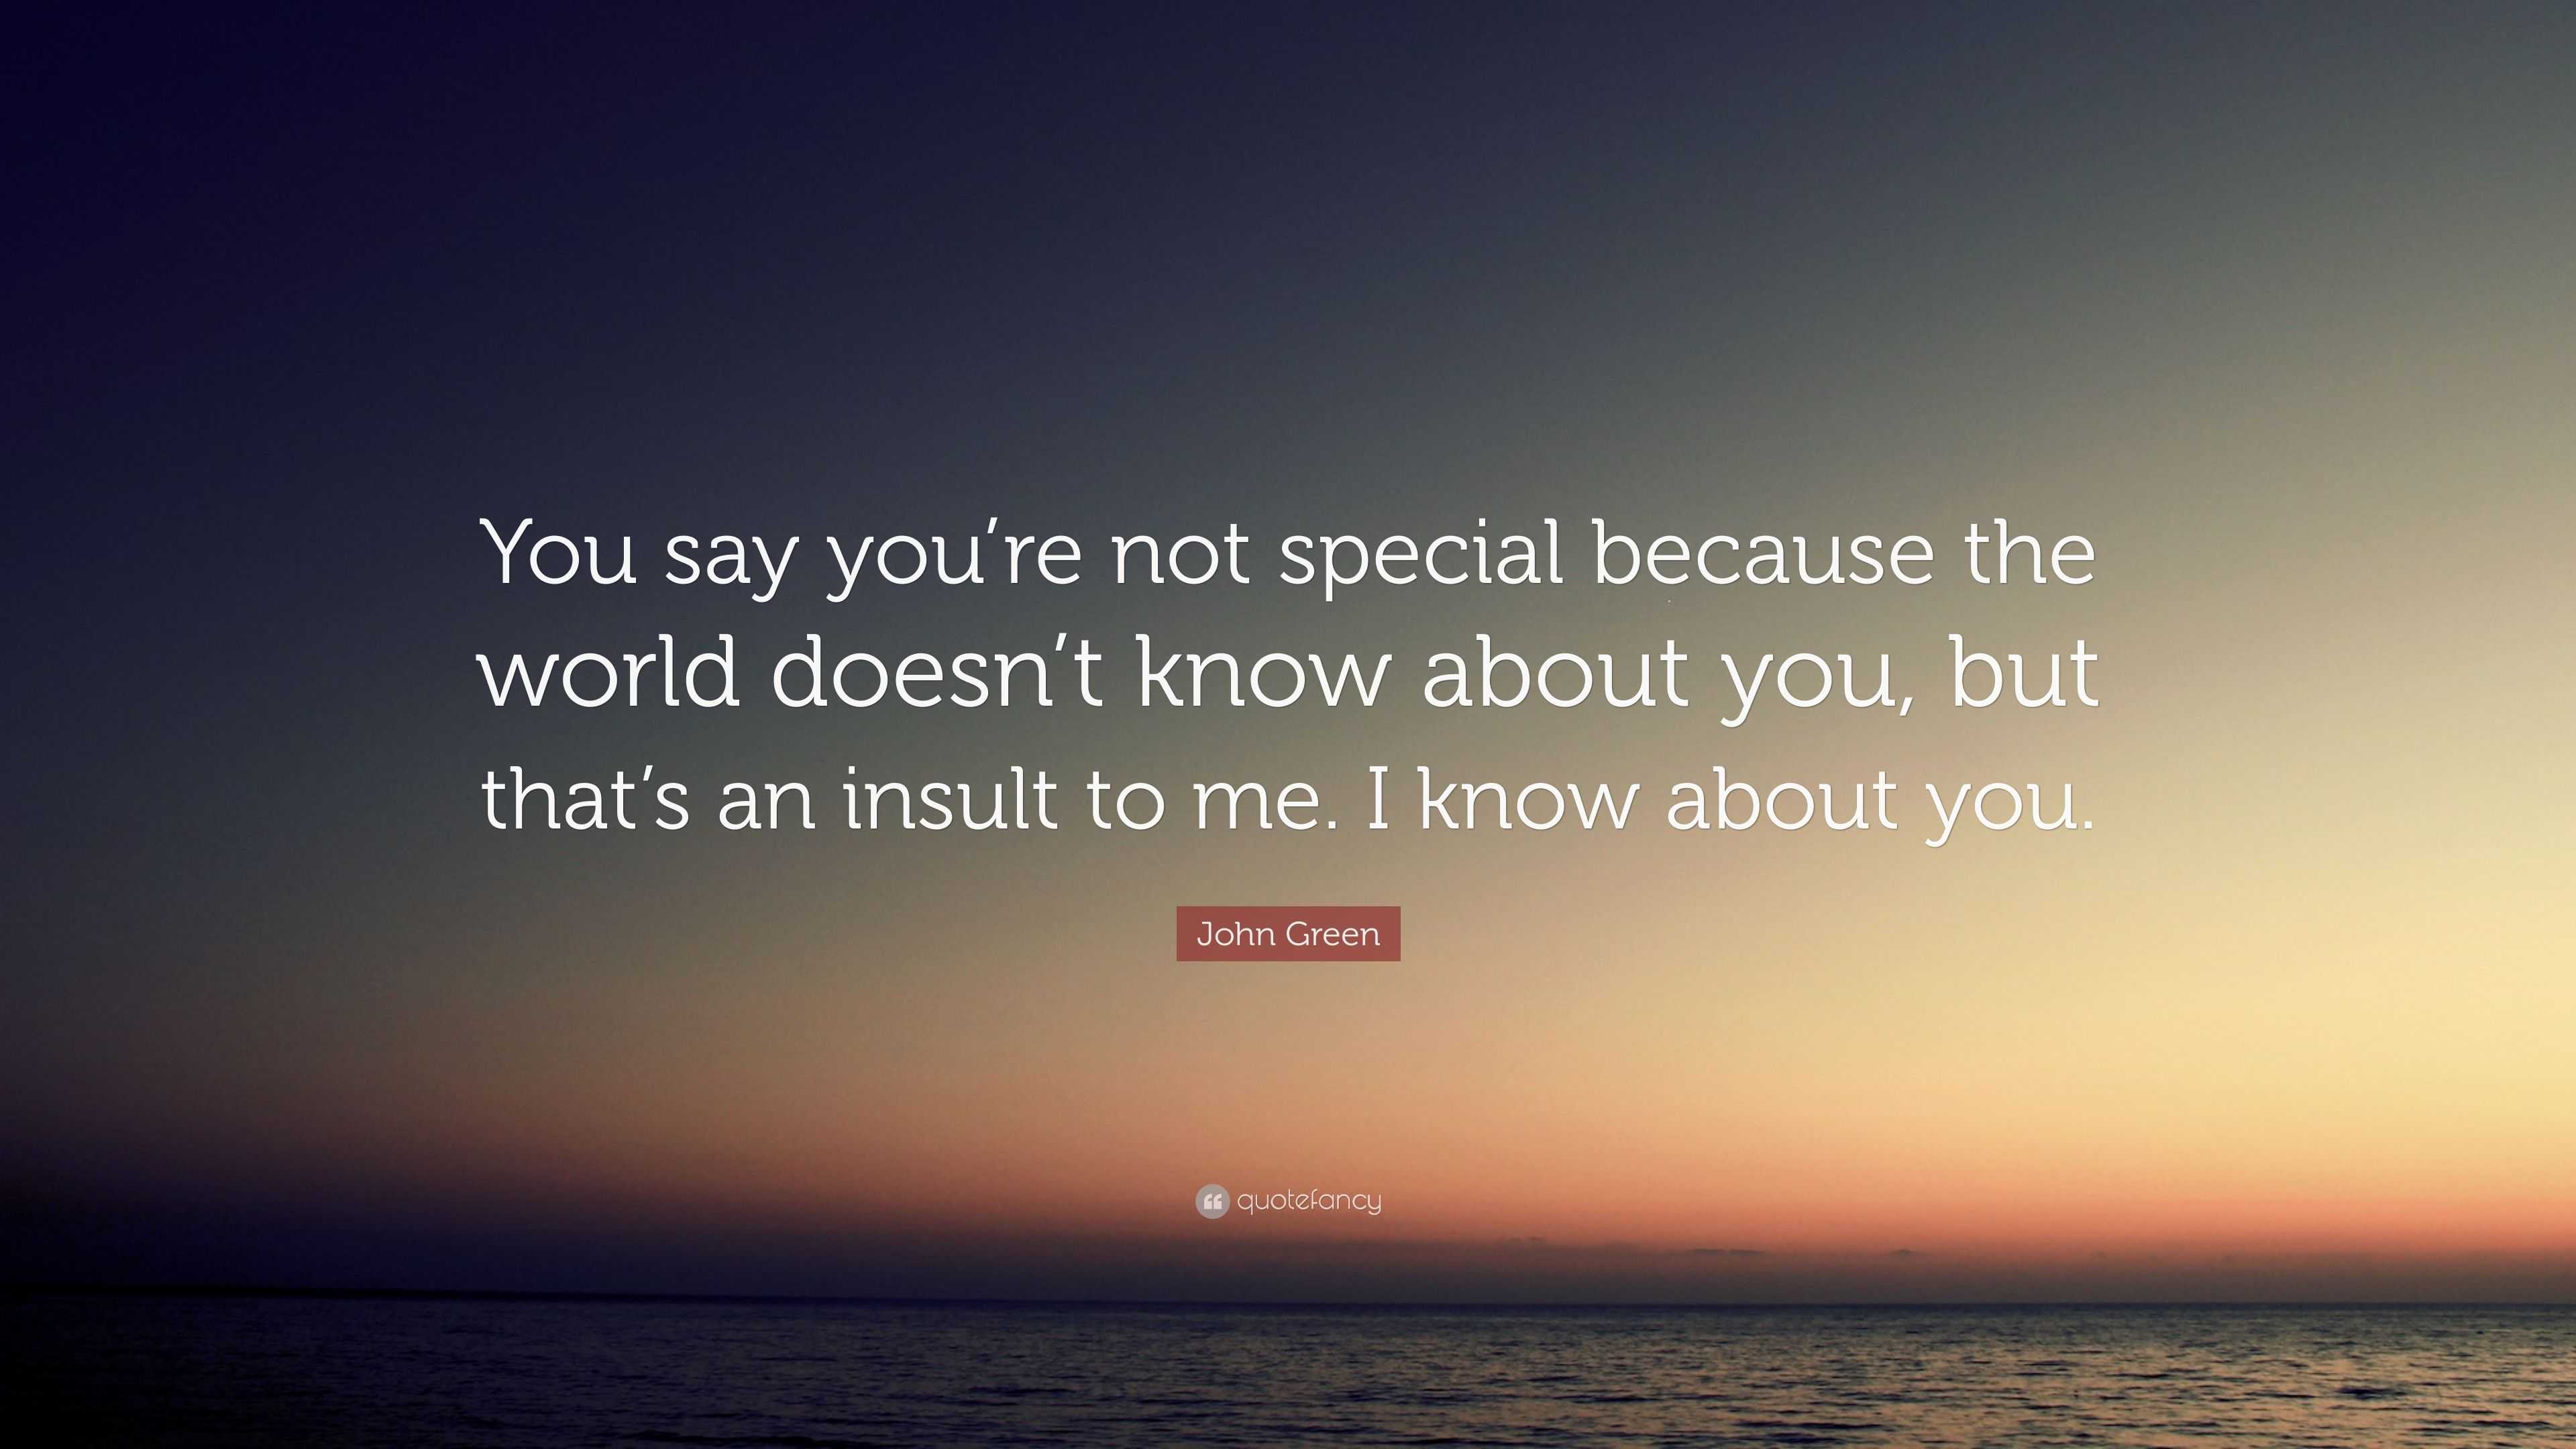 John Green Quote You Say You Re Not Special Because The World Doesn T Know About